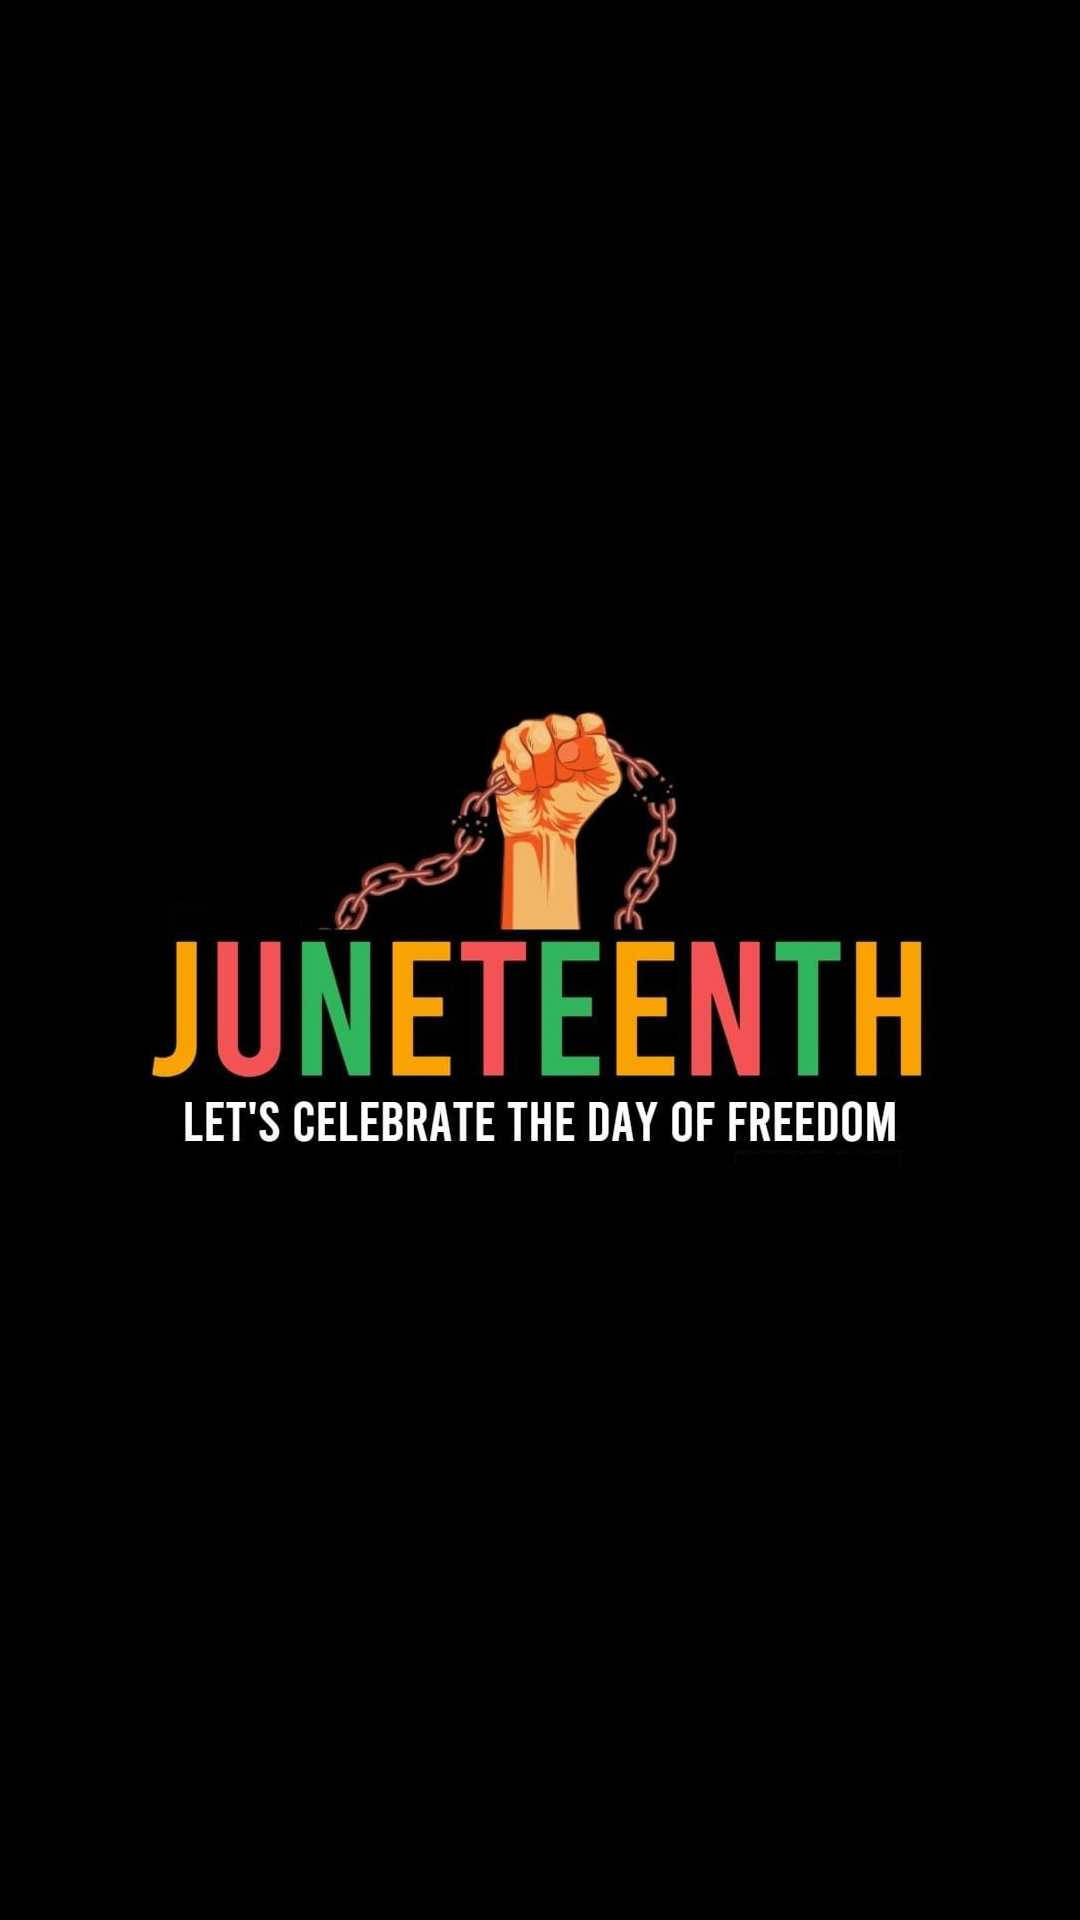 Juneteenth Closed Fist Illustration With Chain Wallpaper